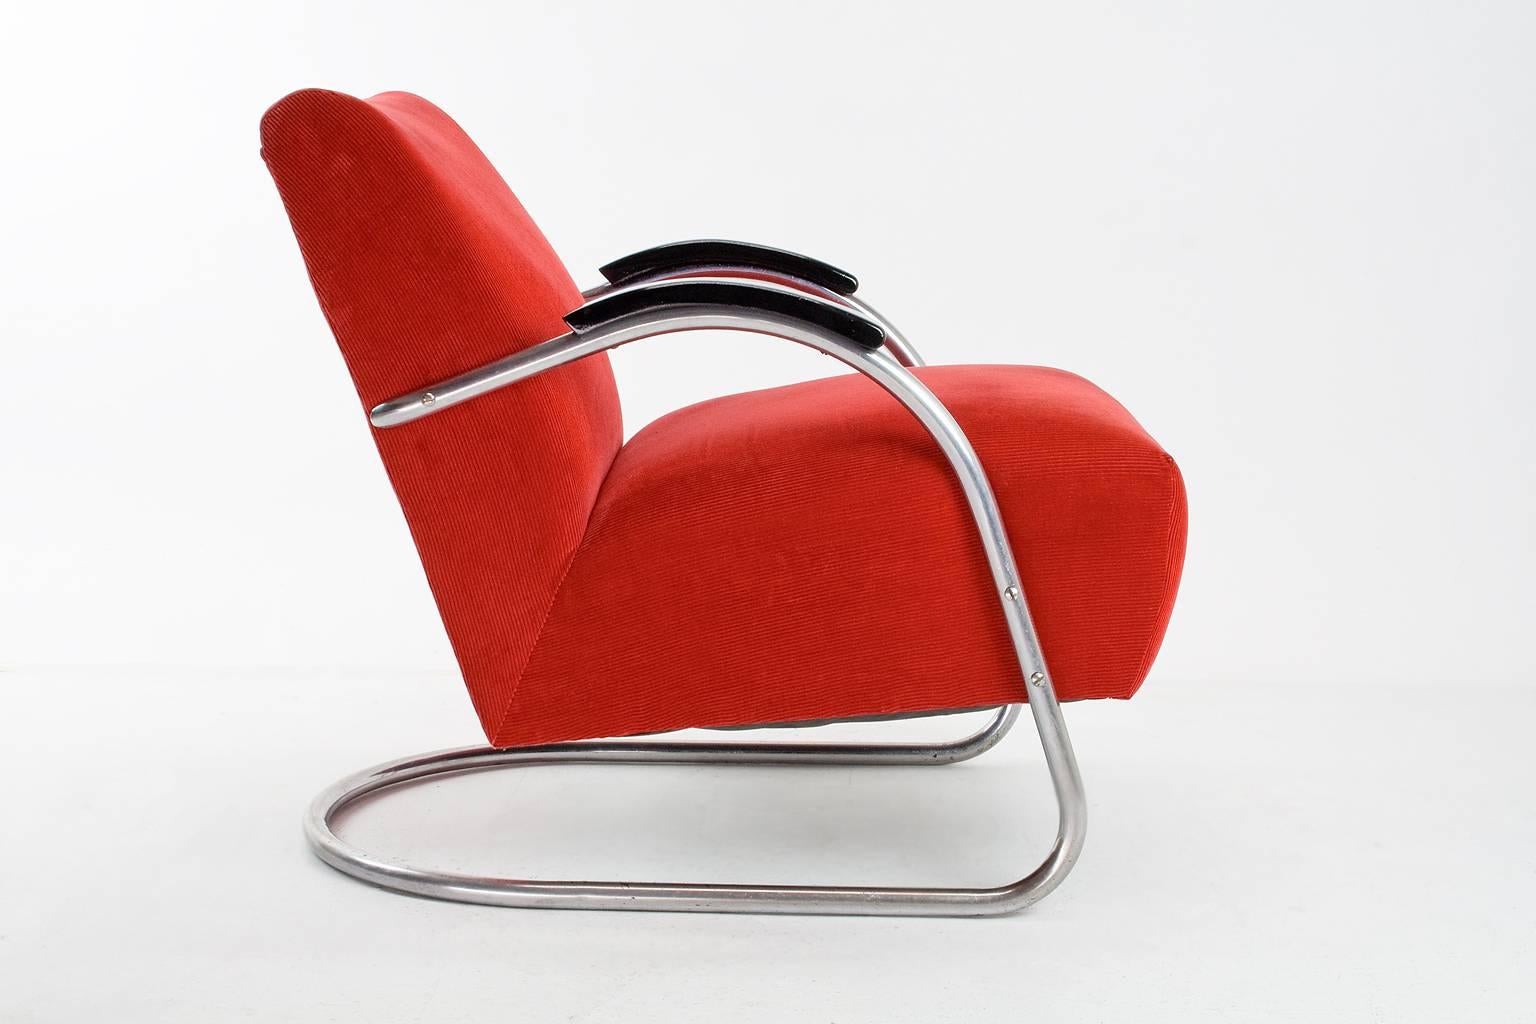 Lovely firemen red Bauhaus armchair of the same period and inspired on the Bauhaus movement. 

This piece is an original 1930s Dutch easy chair by E.M.S. Overschie. The item has been recently new upholstered in a red corduroy fabric, a thick